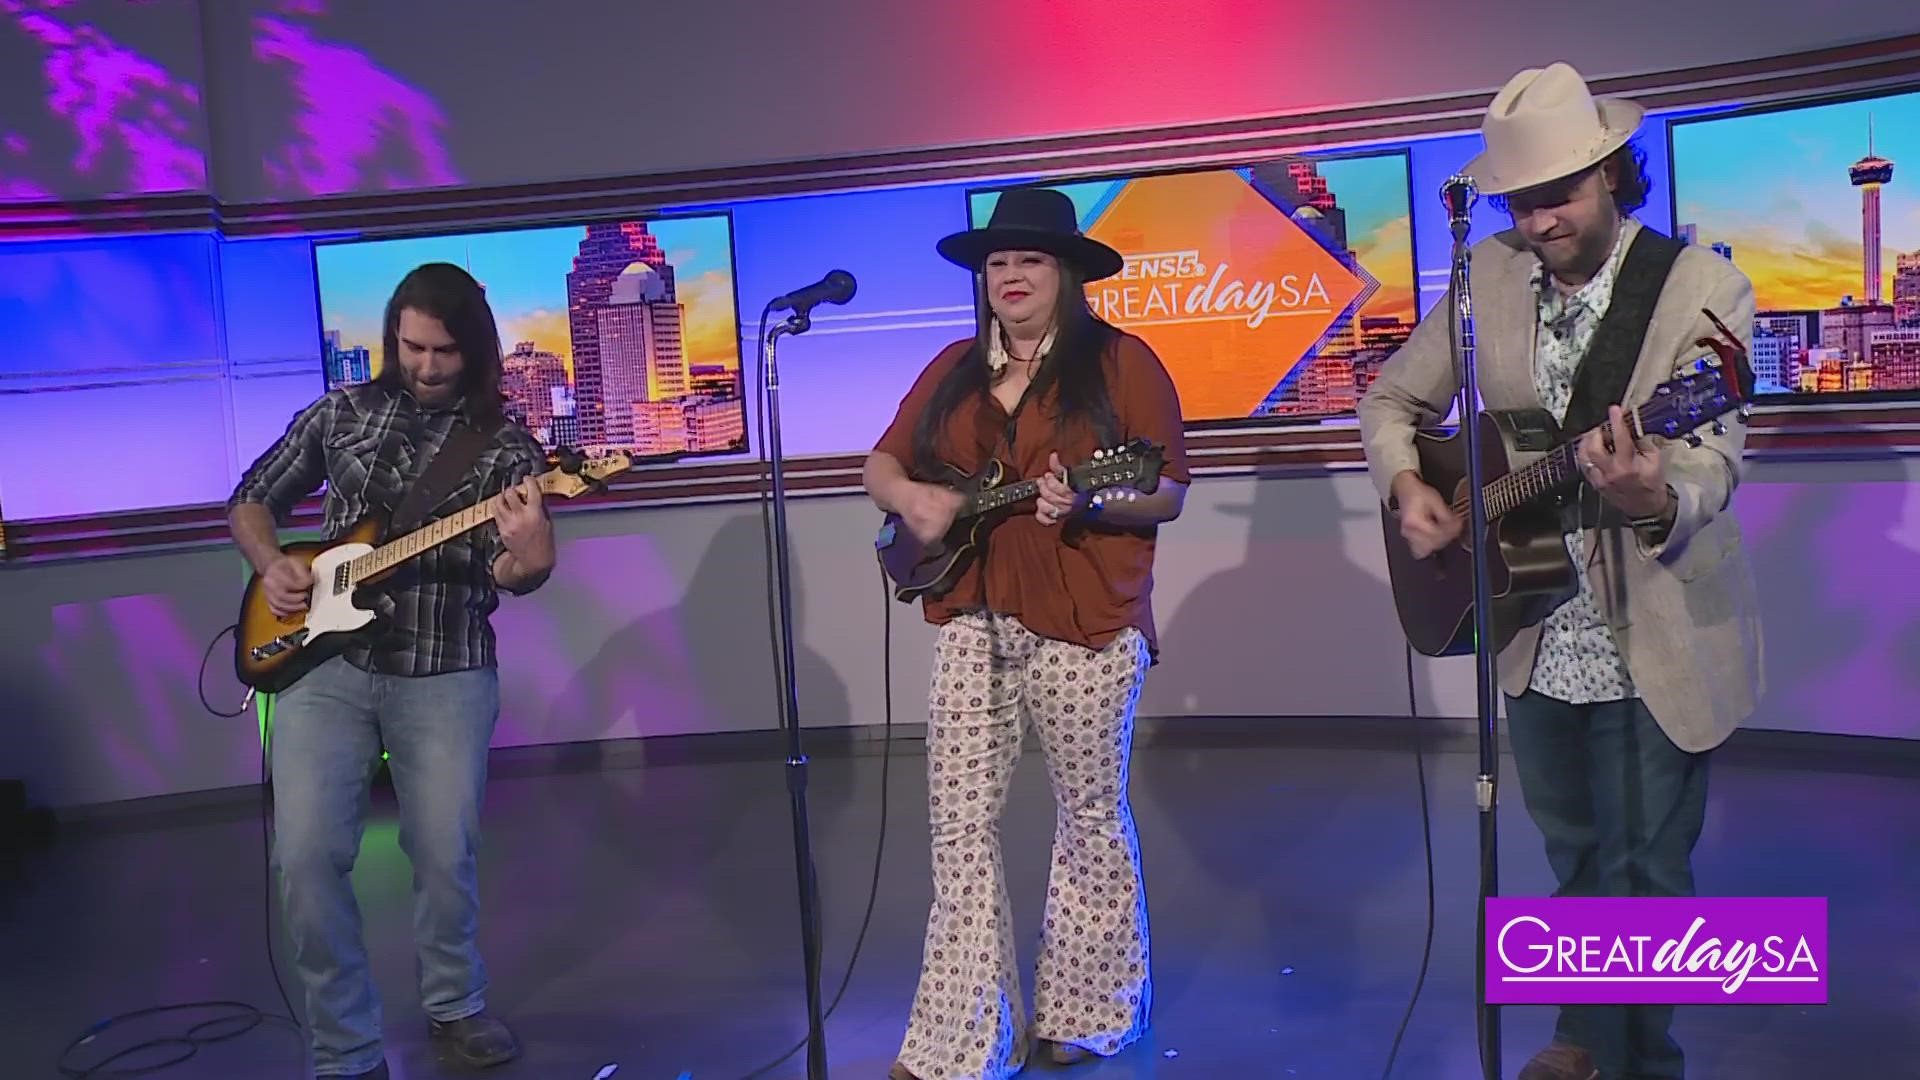 Texas Country Music band Small Town Habit stops by the studio to perform their song "Who Are You?"